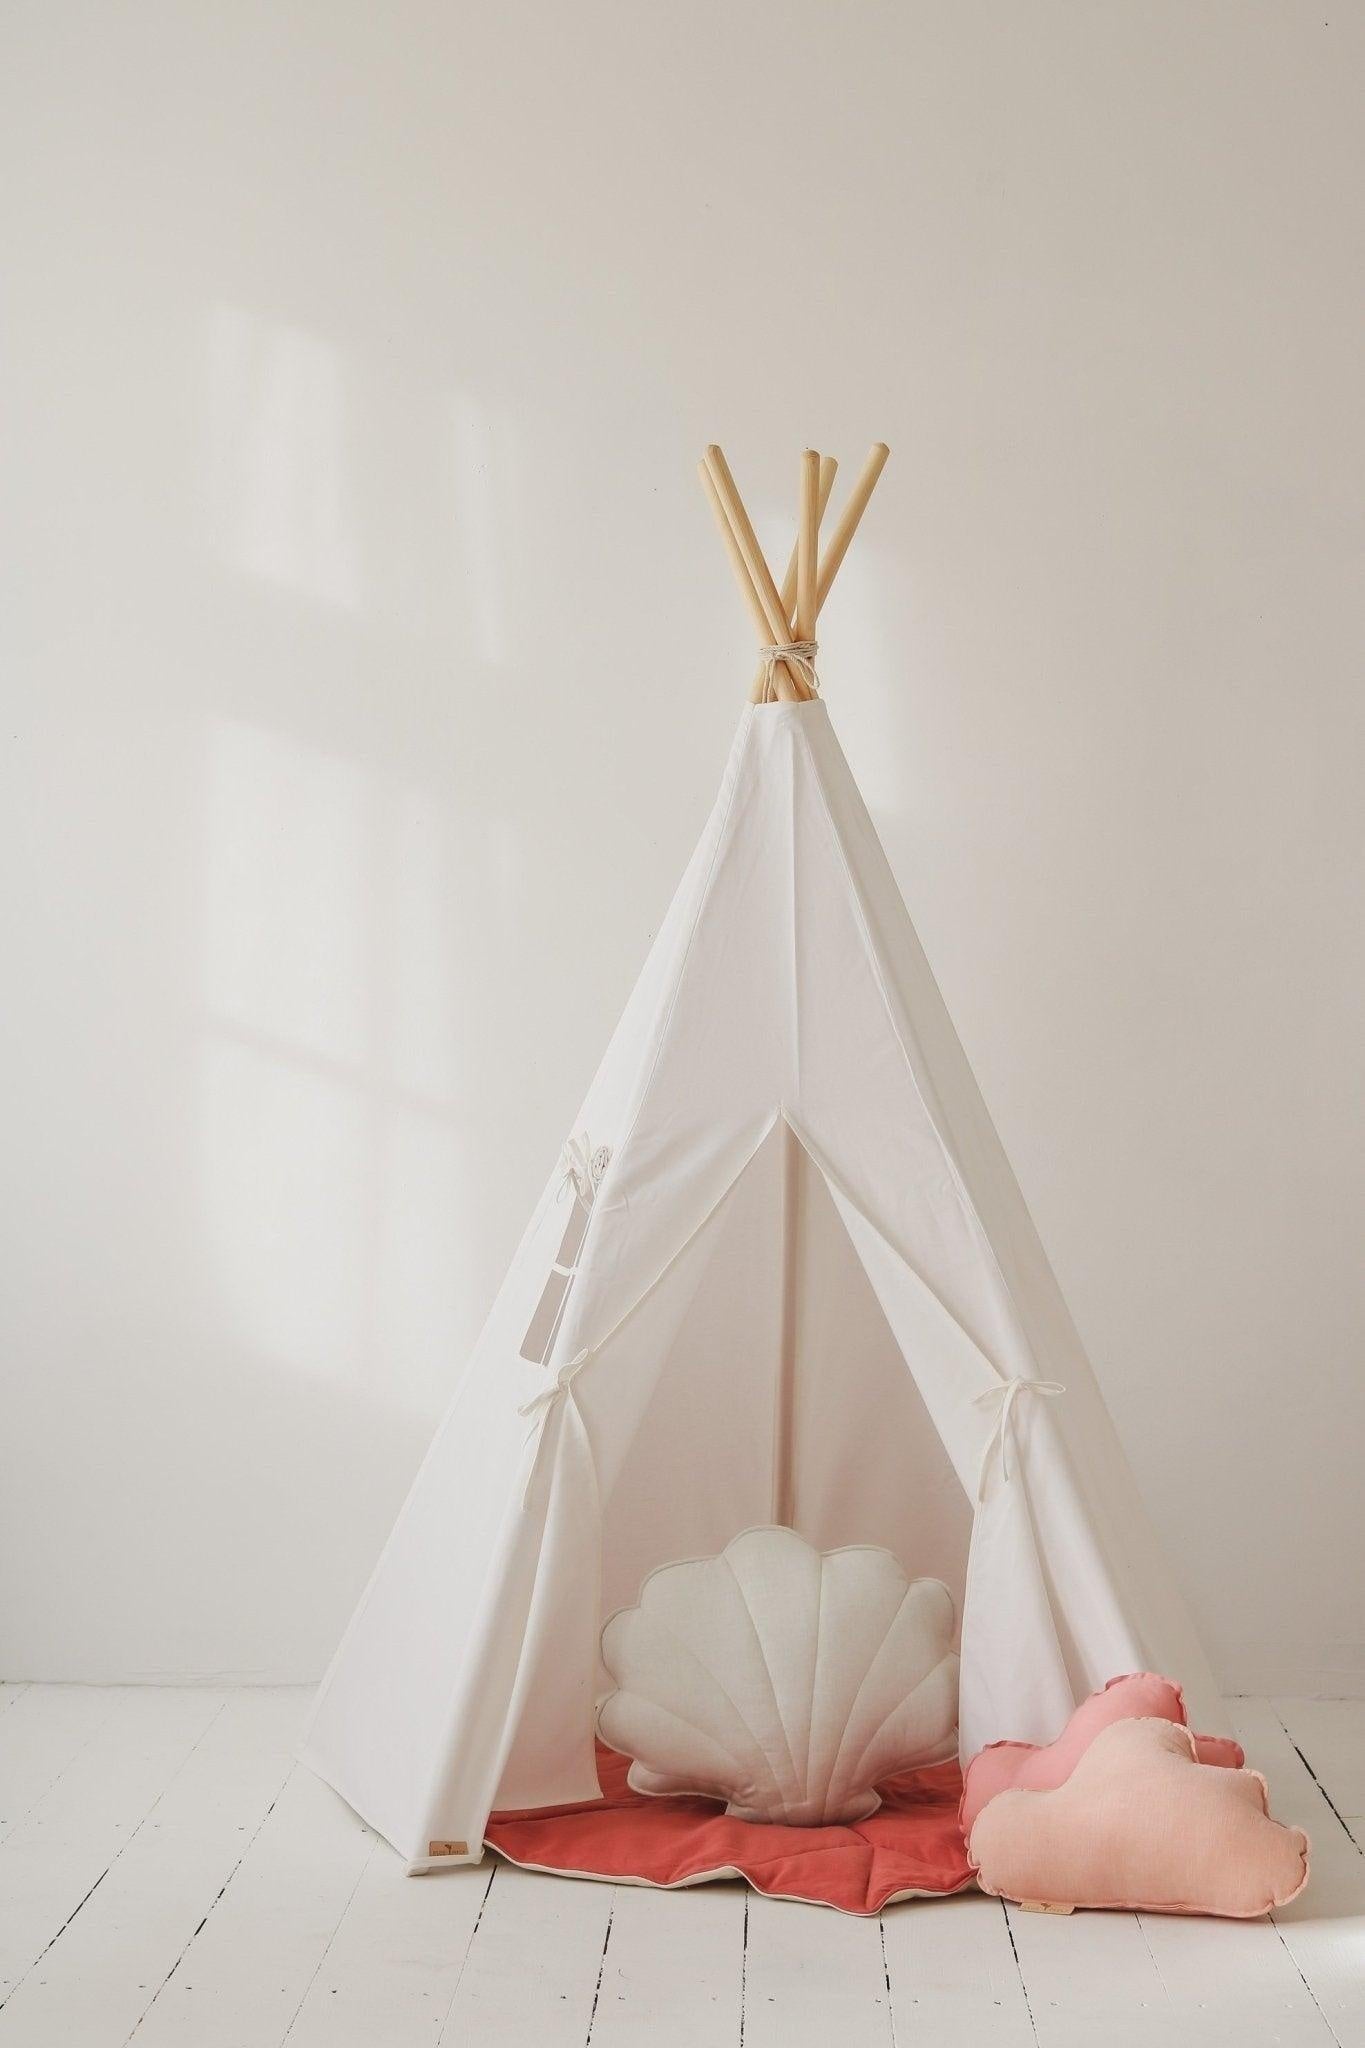 Teepee Tent “Snow White” + "White and Grey" Leaf Mat Set